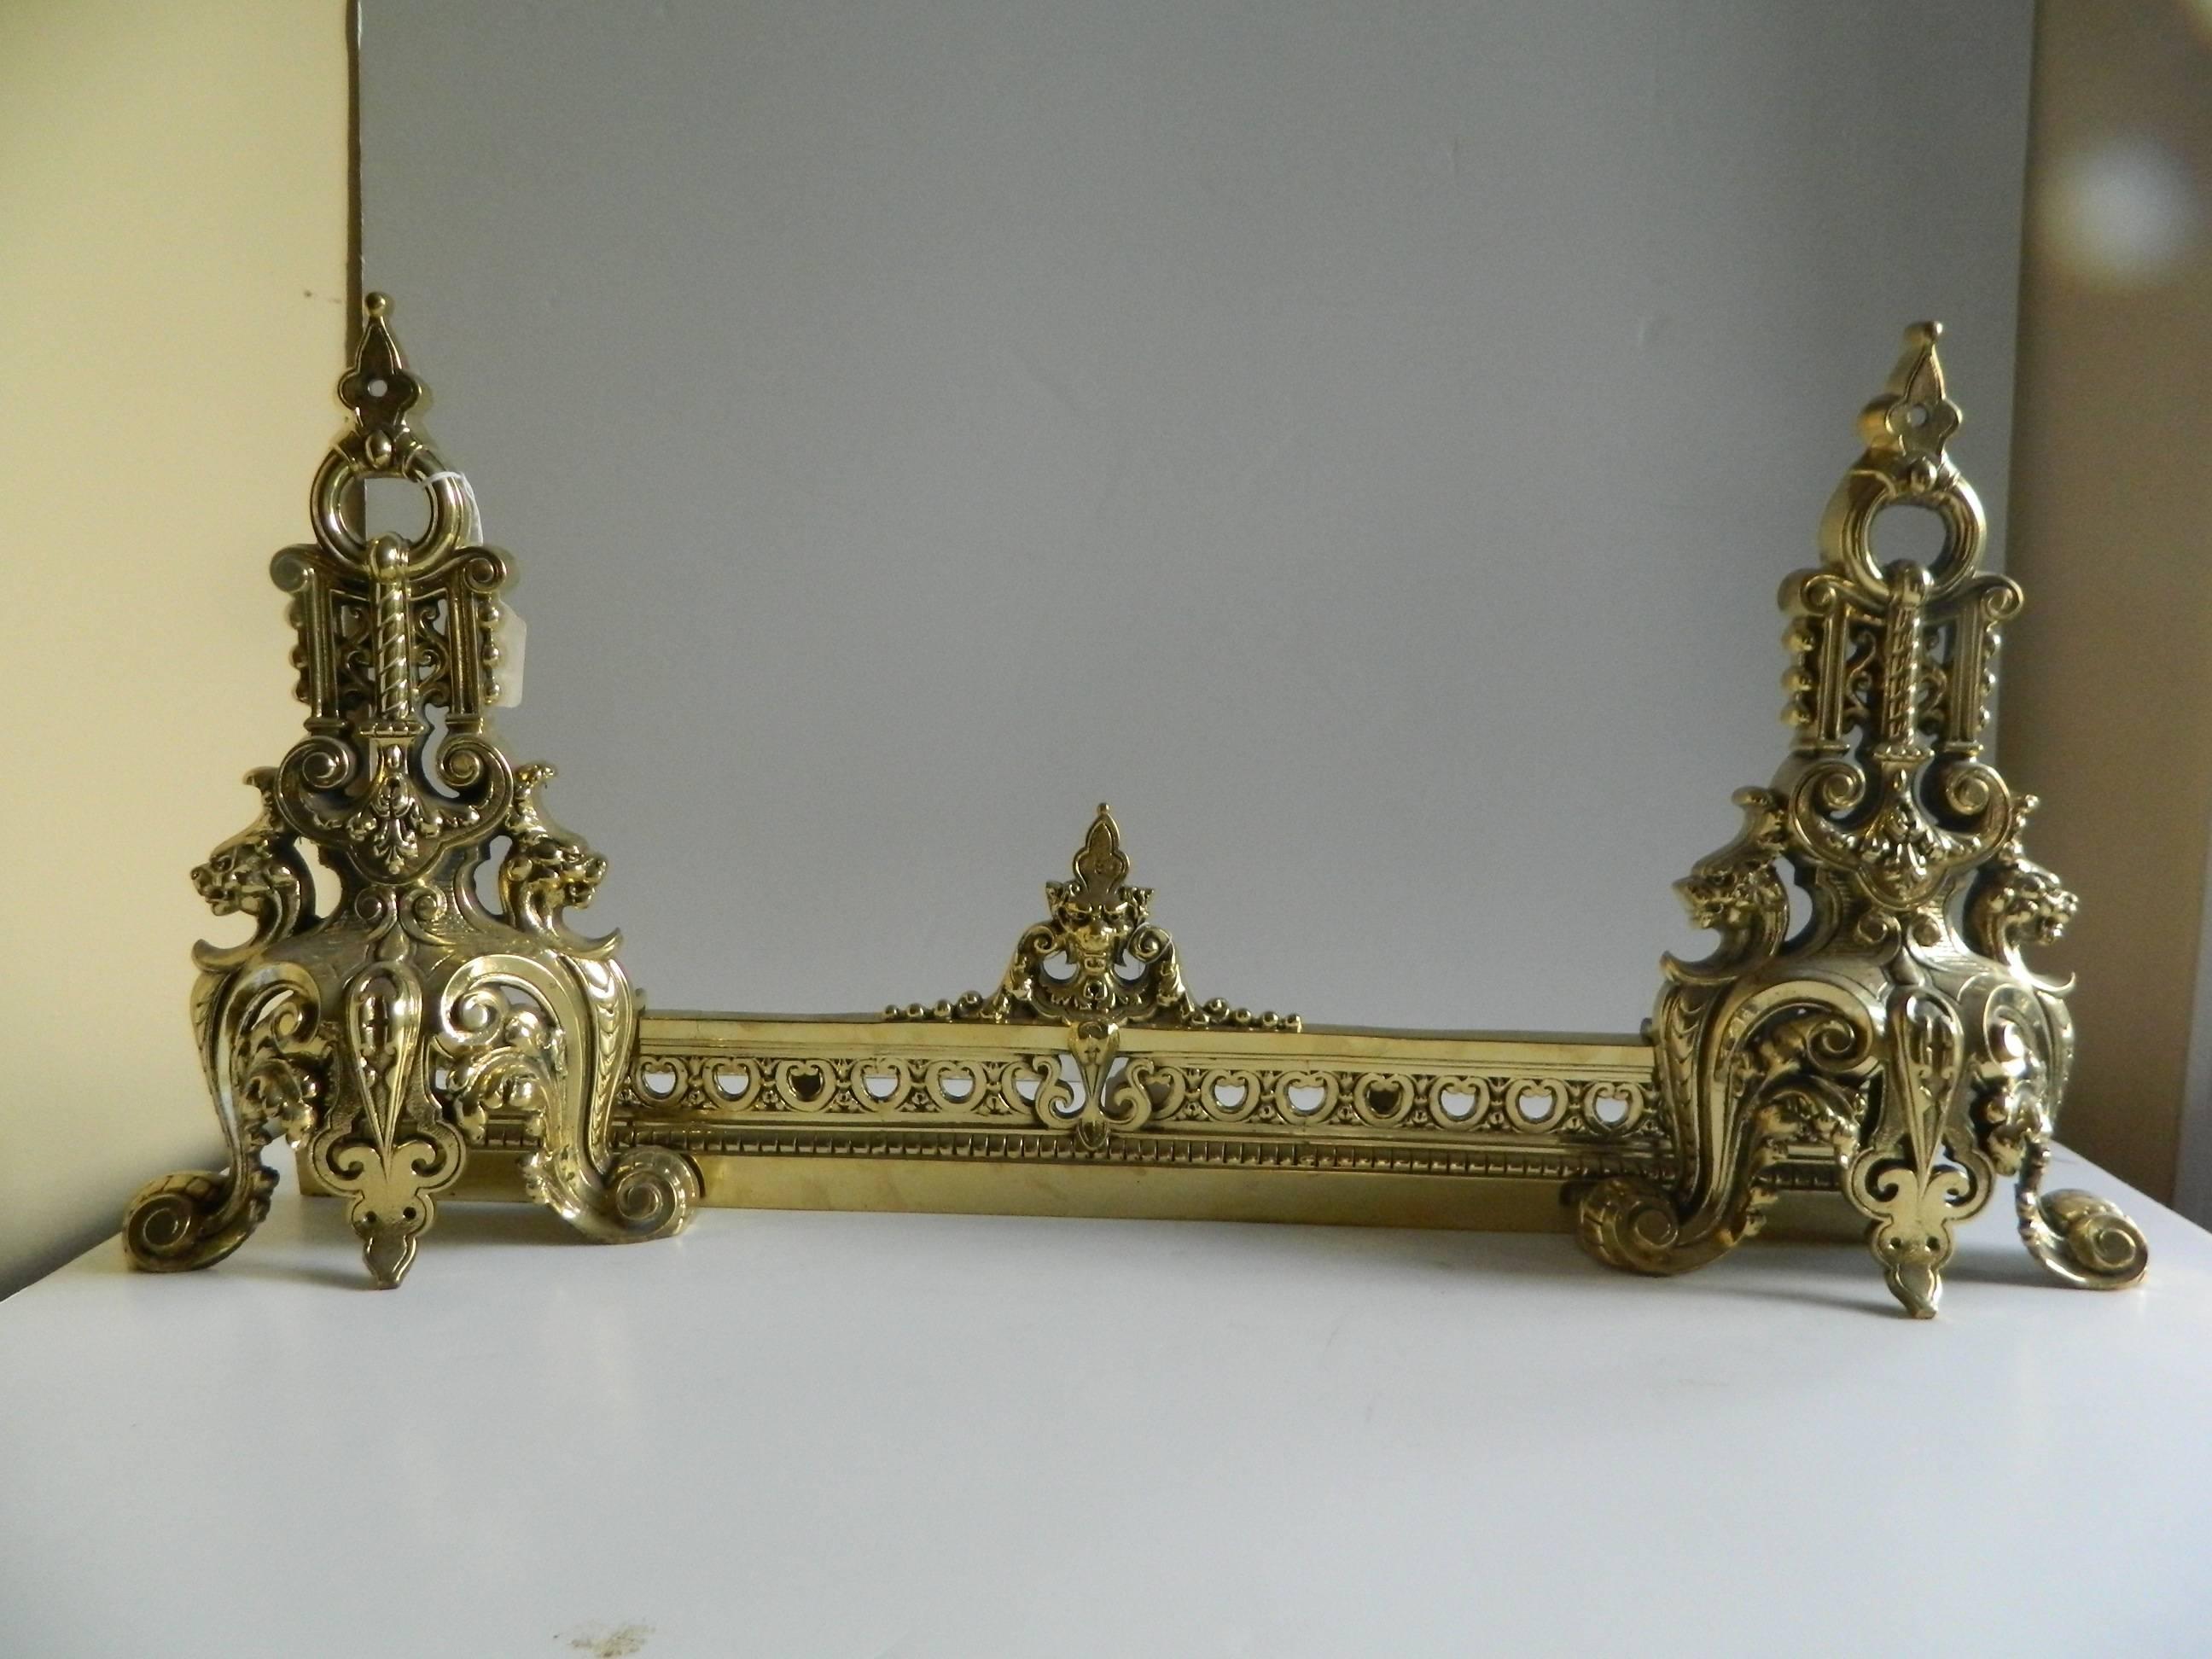 Pair of polished brass chenets or andirons with fender, dragons motif, 19th century.
   